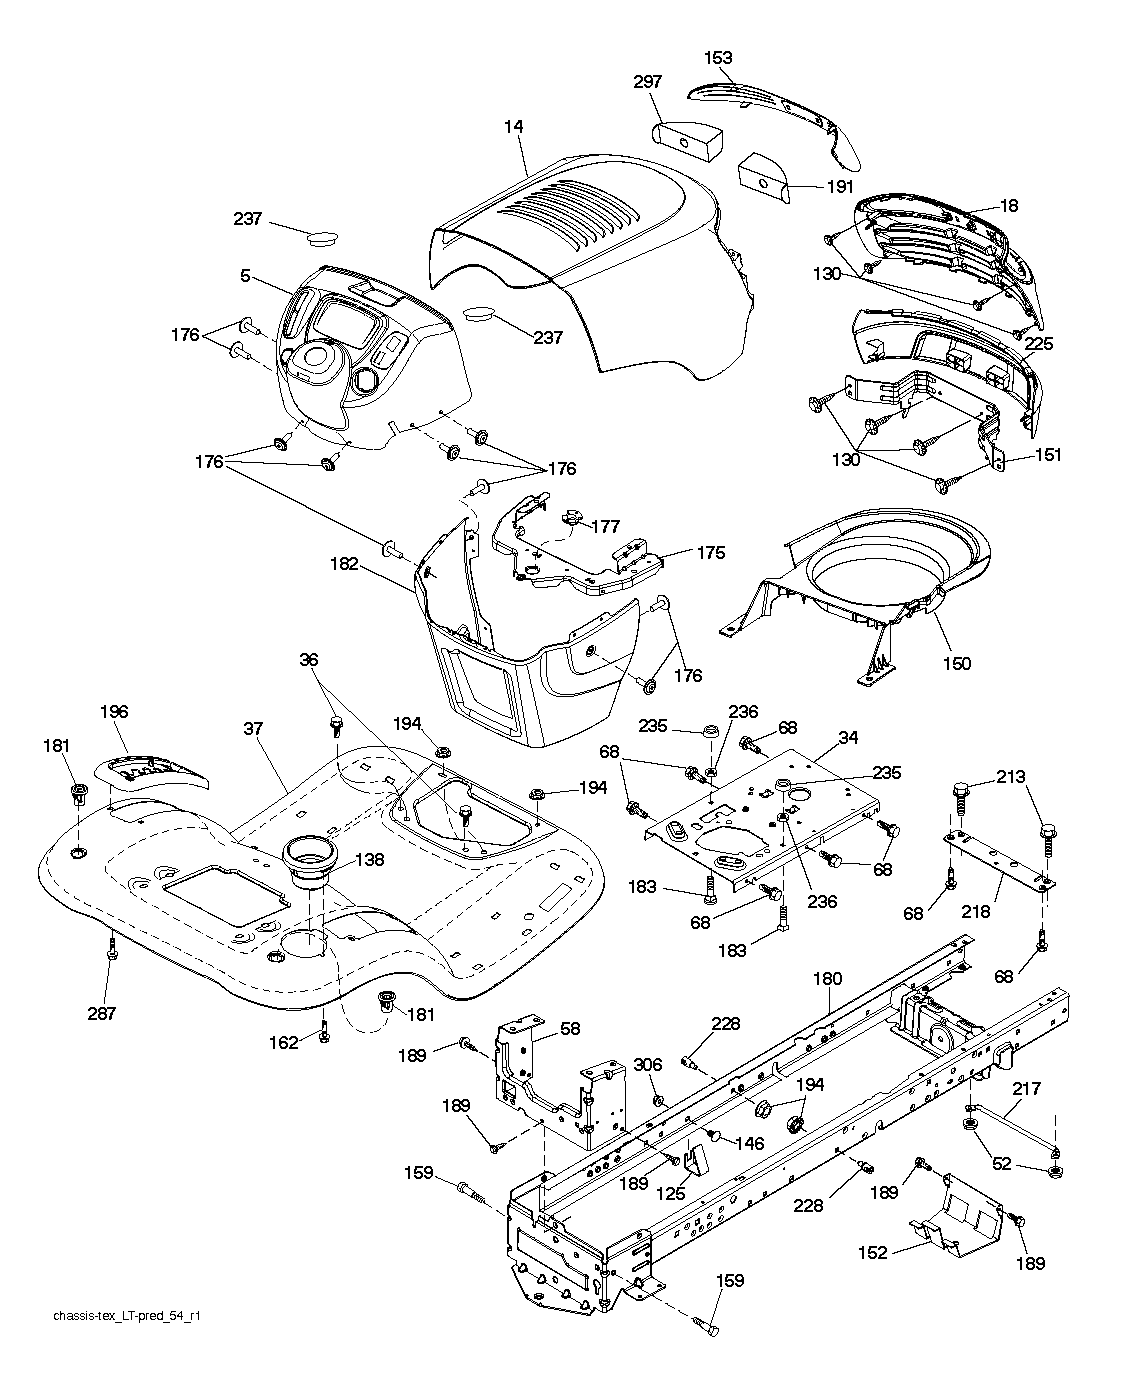 Chassis and appendix 583745601, 532409598, 532426511, 532447253, 596030701, 532420986, 596040501, 532412280, 596030701, 581684801, 596321701, 532409730, 581857901, 583314901, 532187568, 531169901, 532444264, 817000612, 532142432, 532199472, 532400776, 532195228, 532415063, 532404796, 532407176, 874520520, 532428867, 532416502, 583612701, 532414581, 596030501, 532409167, 532196395, 532445875, 593824001, 532406129, 873930500, 532403704, 817600406, 532401827, 532409149